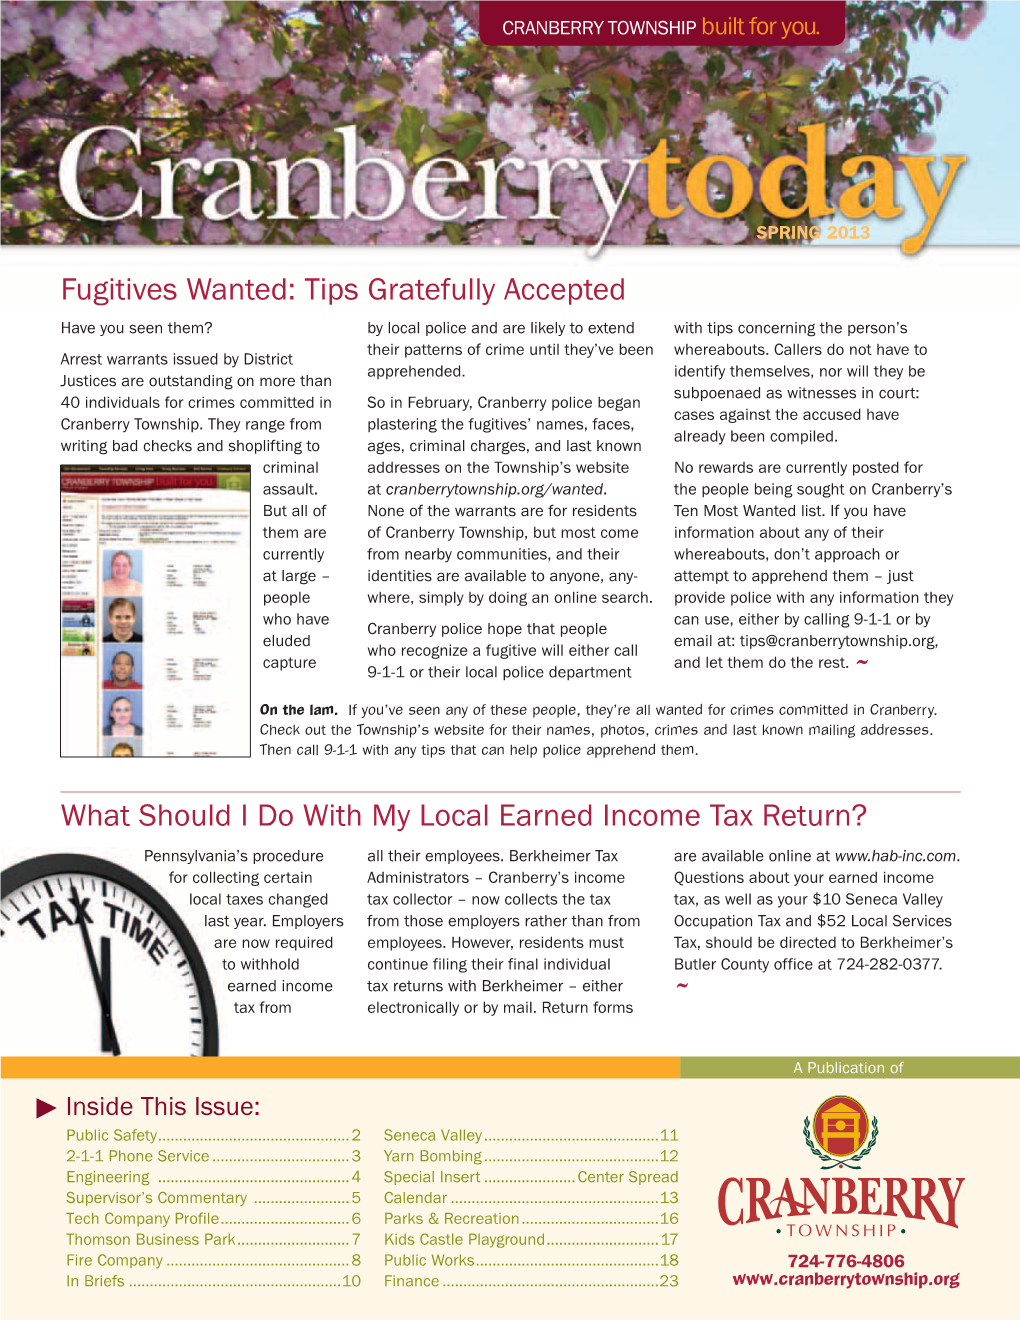 Tips Gratefully Accepted What Should I Do with My Local Earned Income